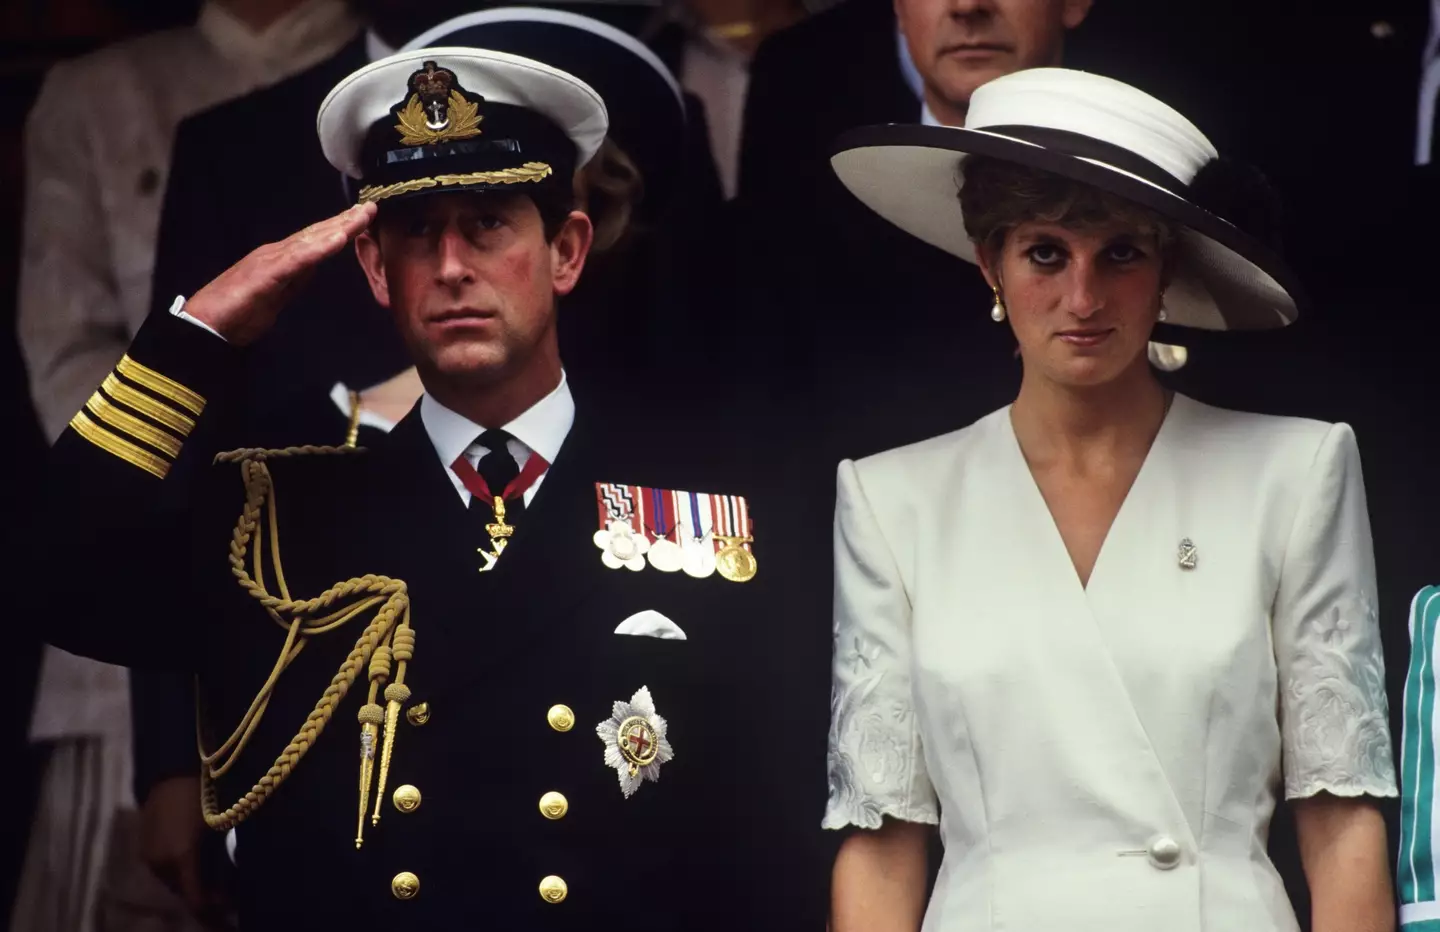 Prince Charles and Princess Diana married in 1981.